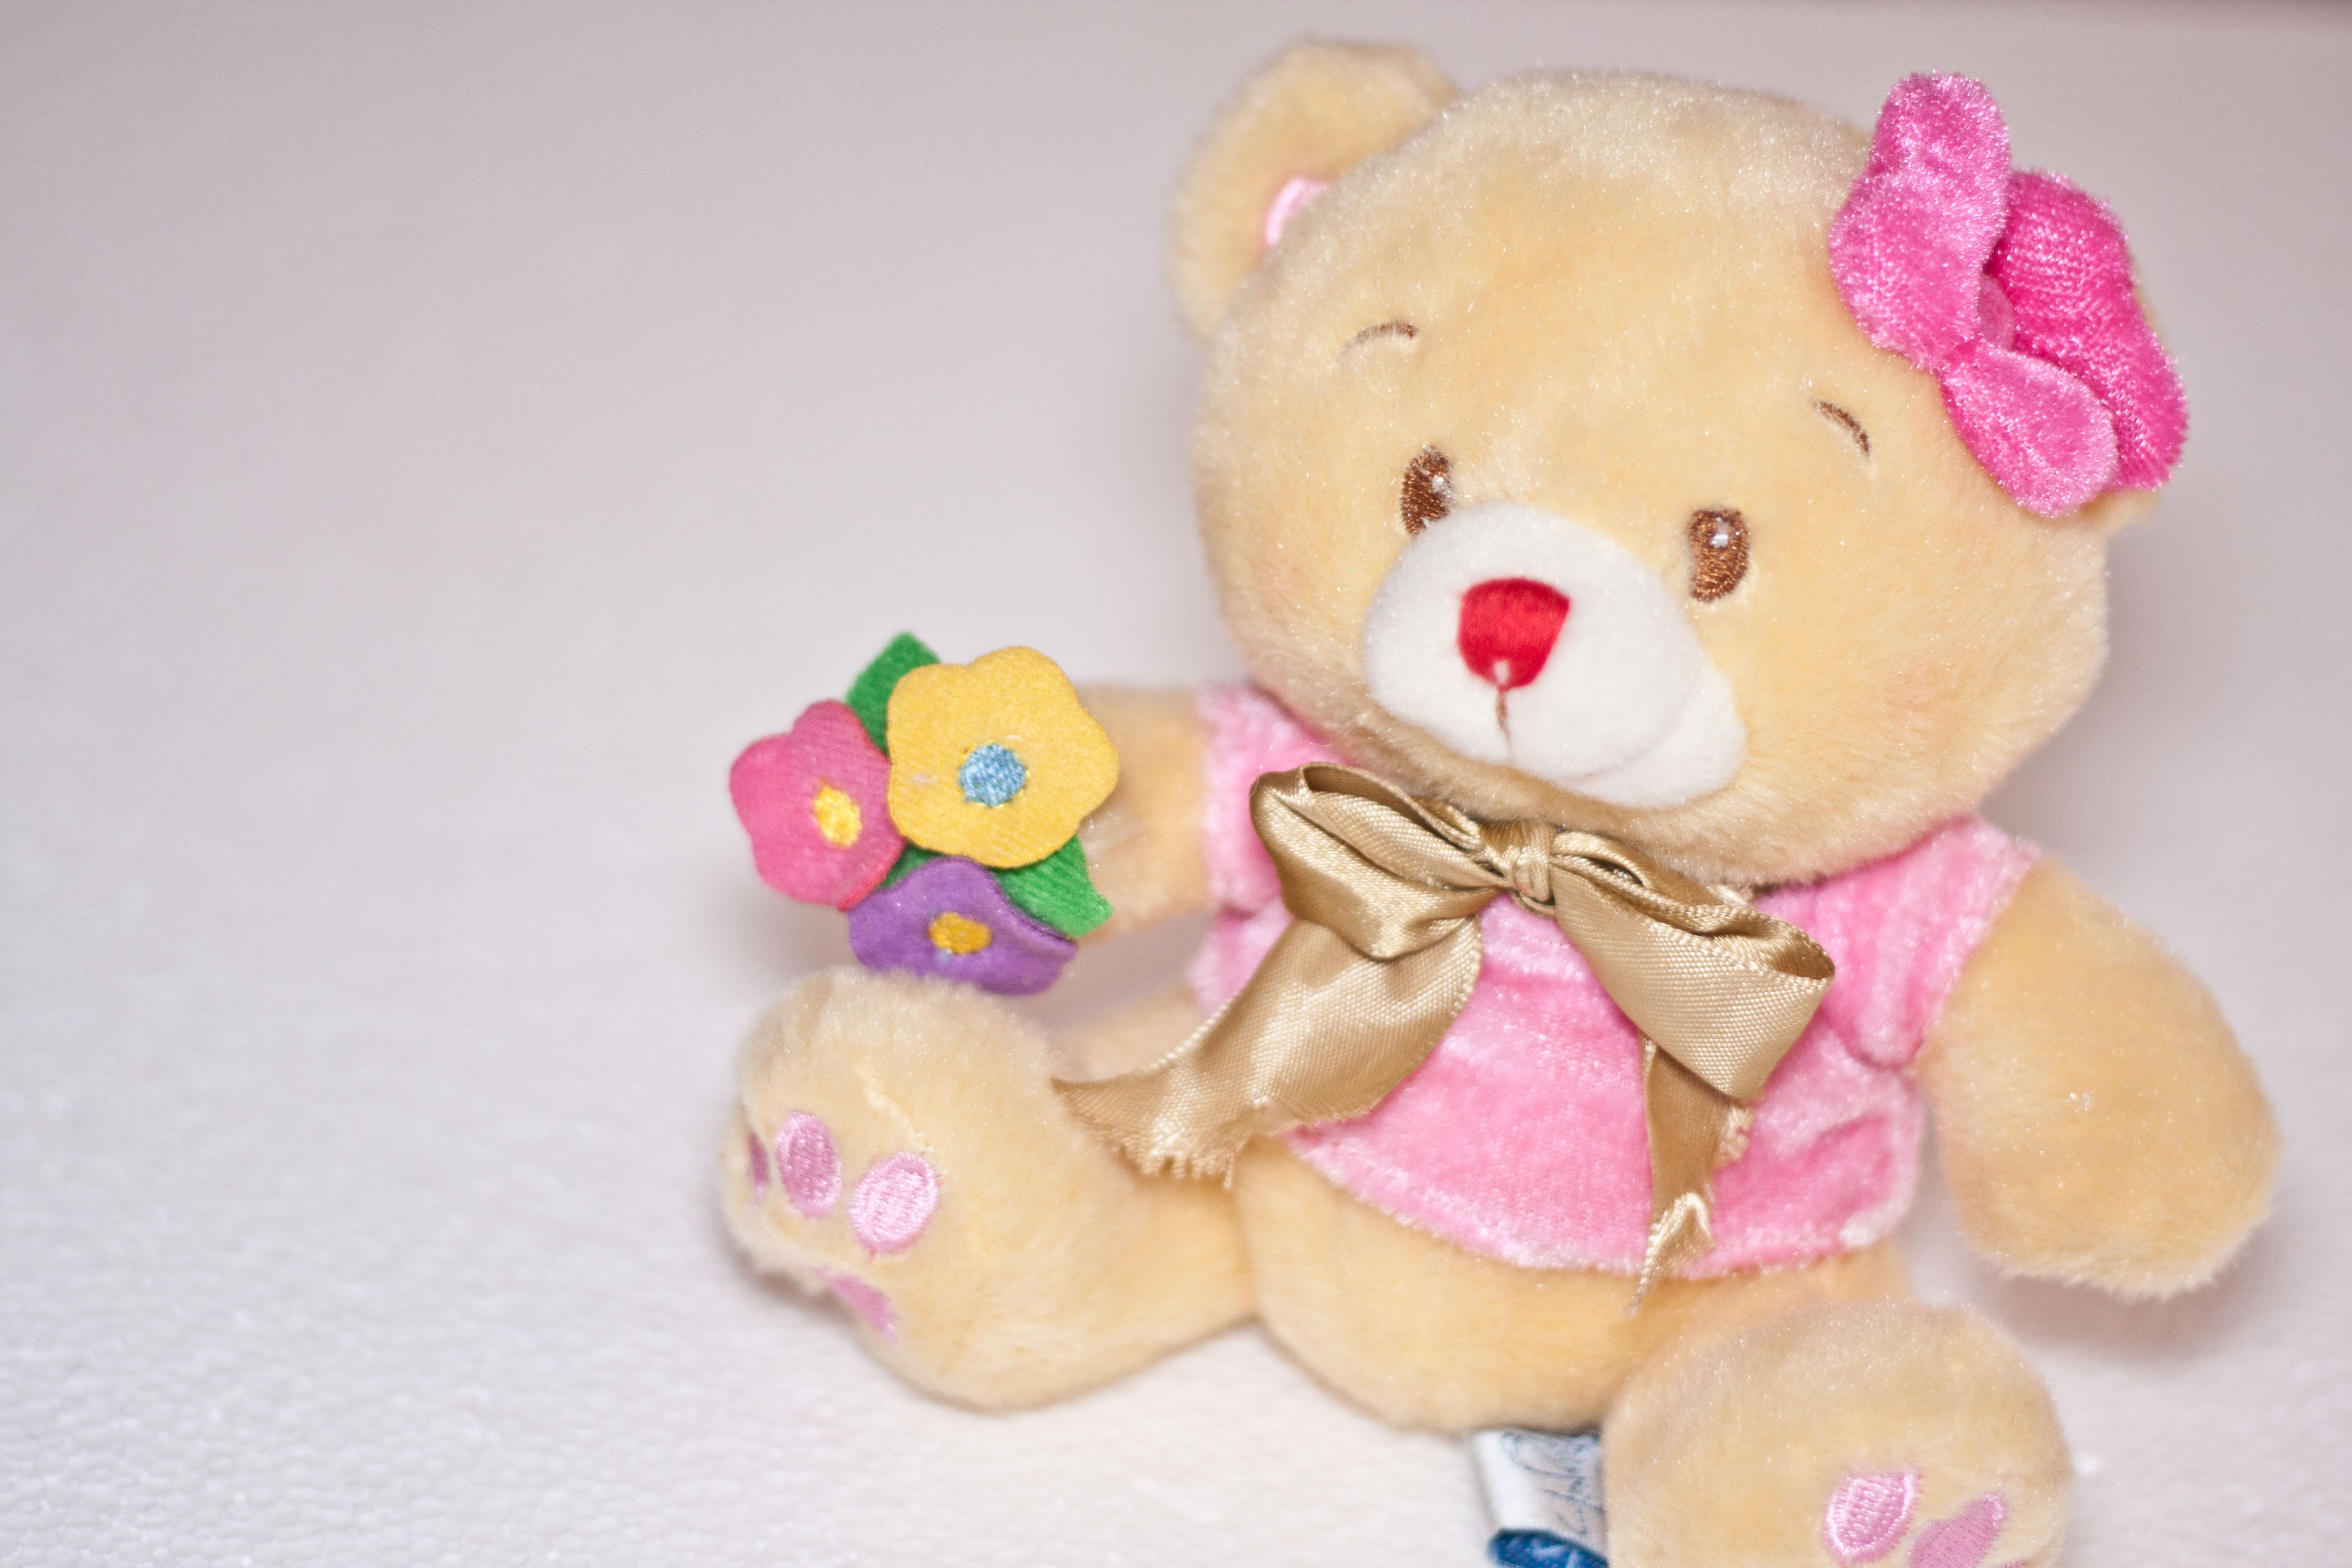 How To Choose A Teddy Bearsteps - Teddy Bears Images Free Download - HD Wallpaper 